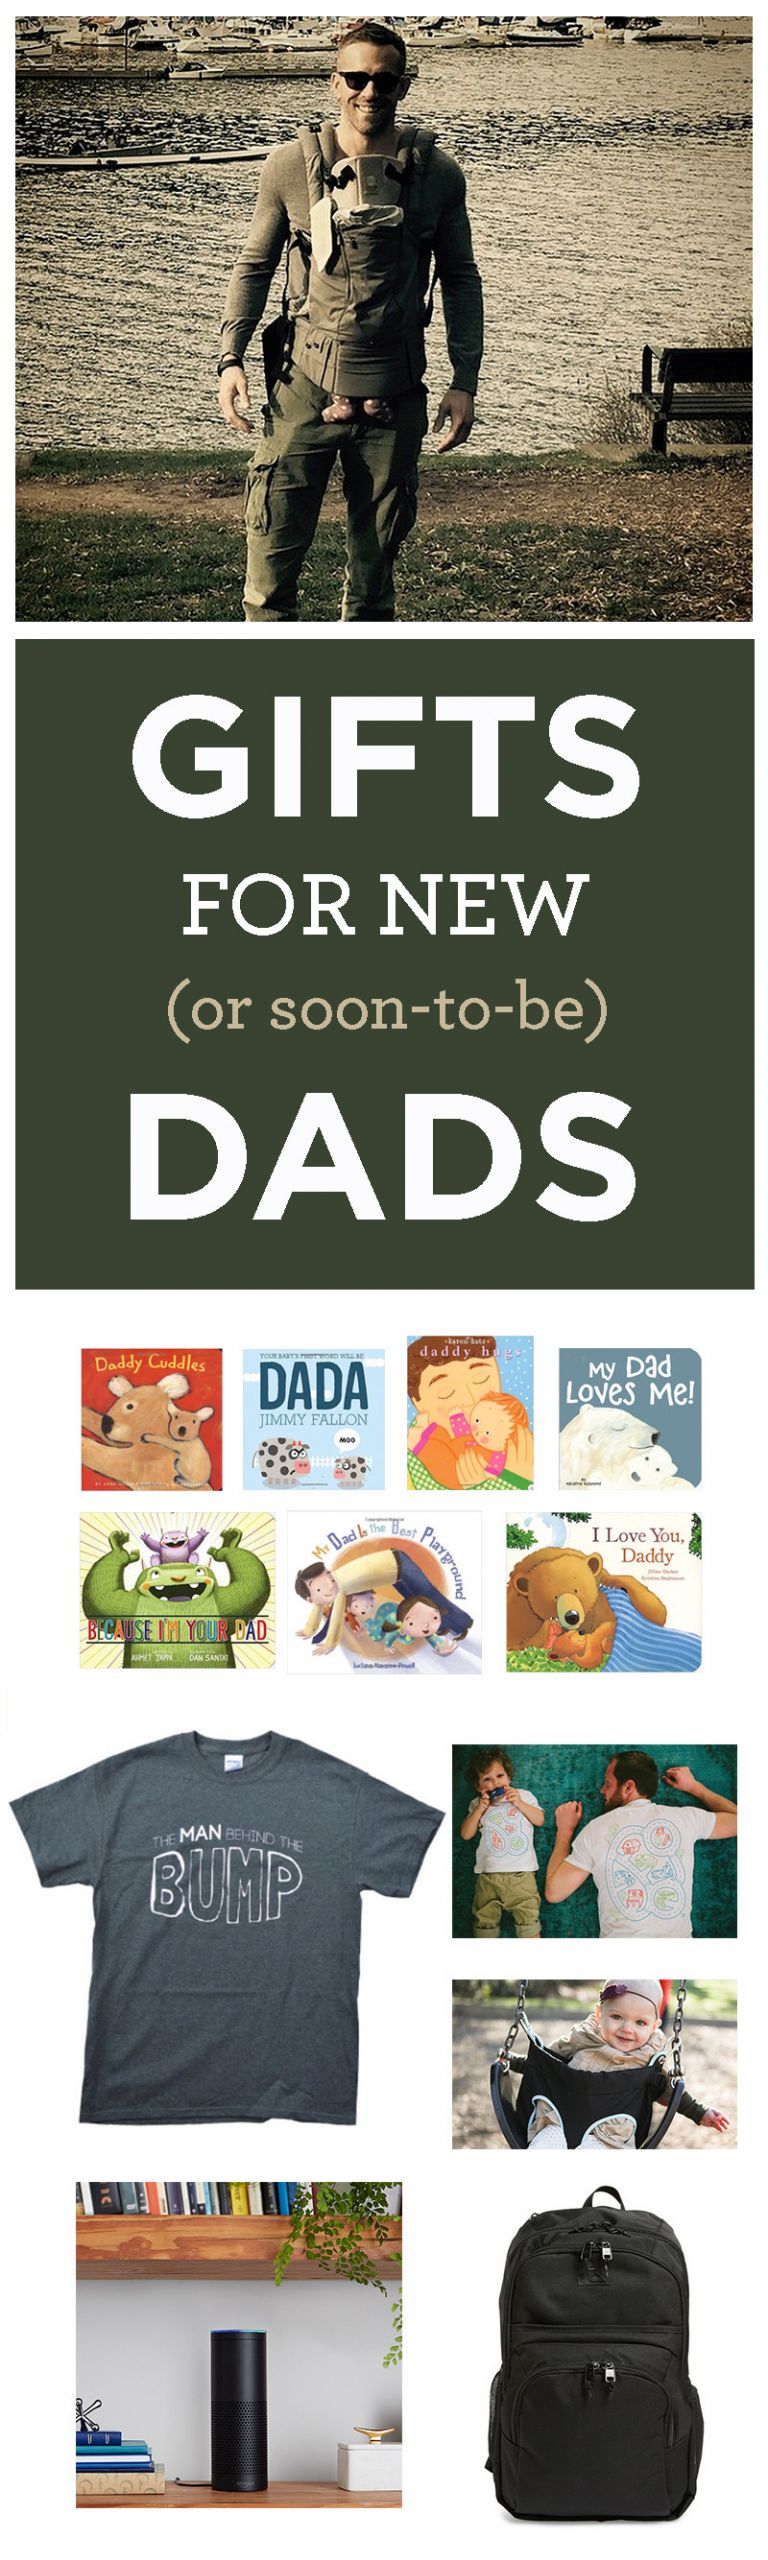 Father'S Day Gift Ideas For Soon To Be Dads
 Great Gifts for a New Dad or Dad To Be